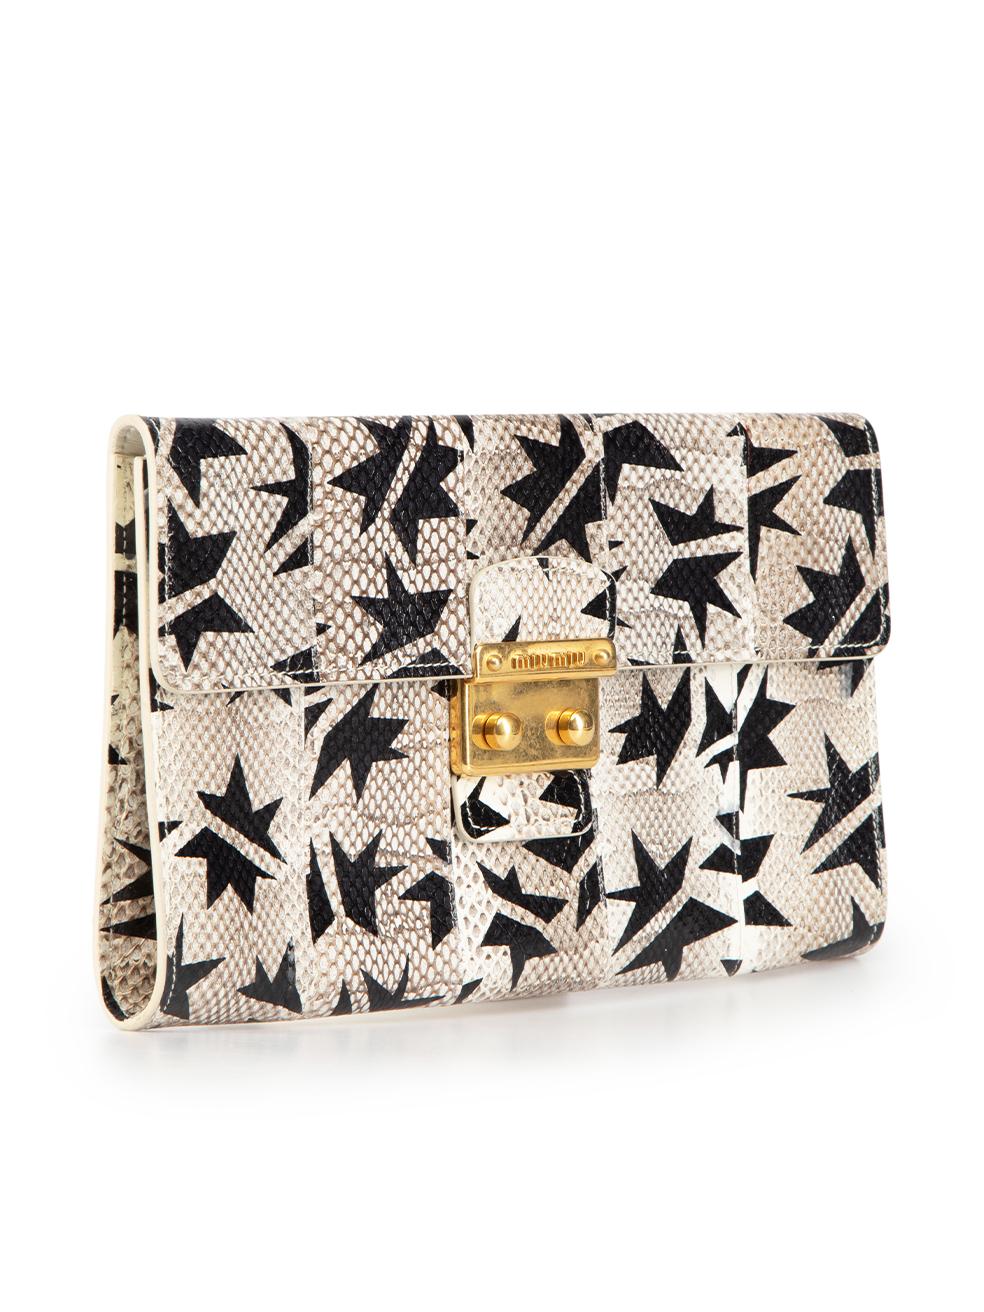 CONDITION is Very good. Minimal wear to clutch bag is evident. Minimal wear to surface print with some mild colour dispersion around the stars. Very light hardware tarnishing also seen at clasp on this used Miu Miu designer resale item.
